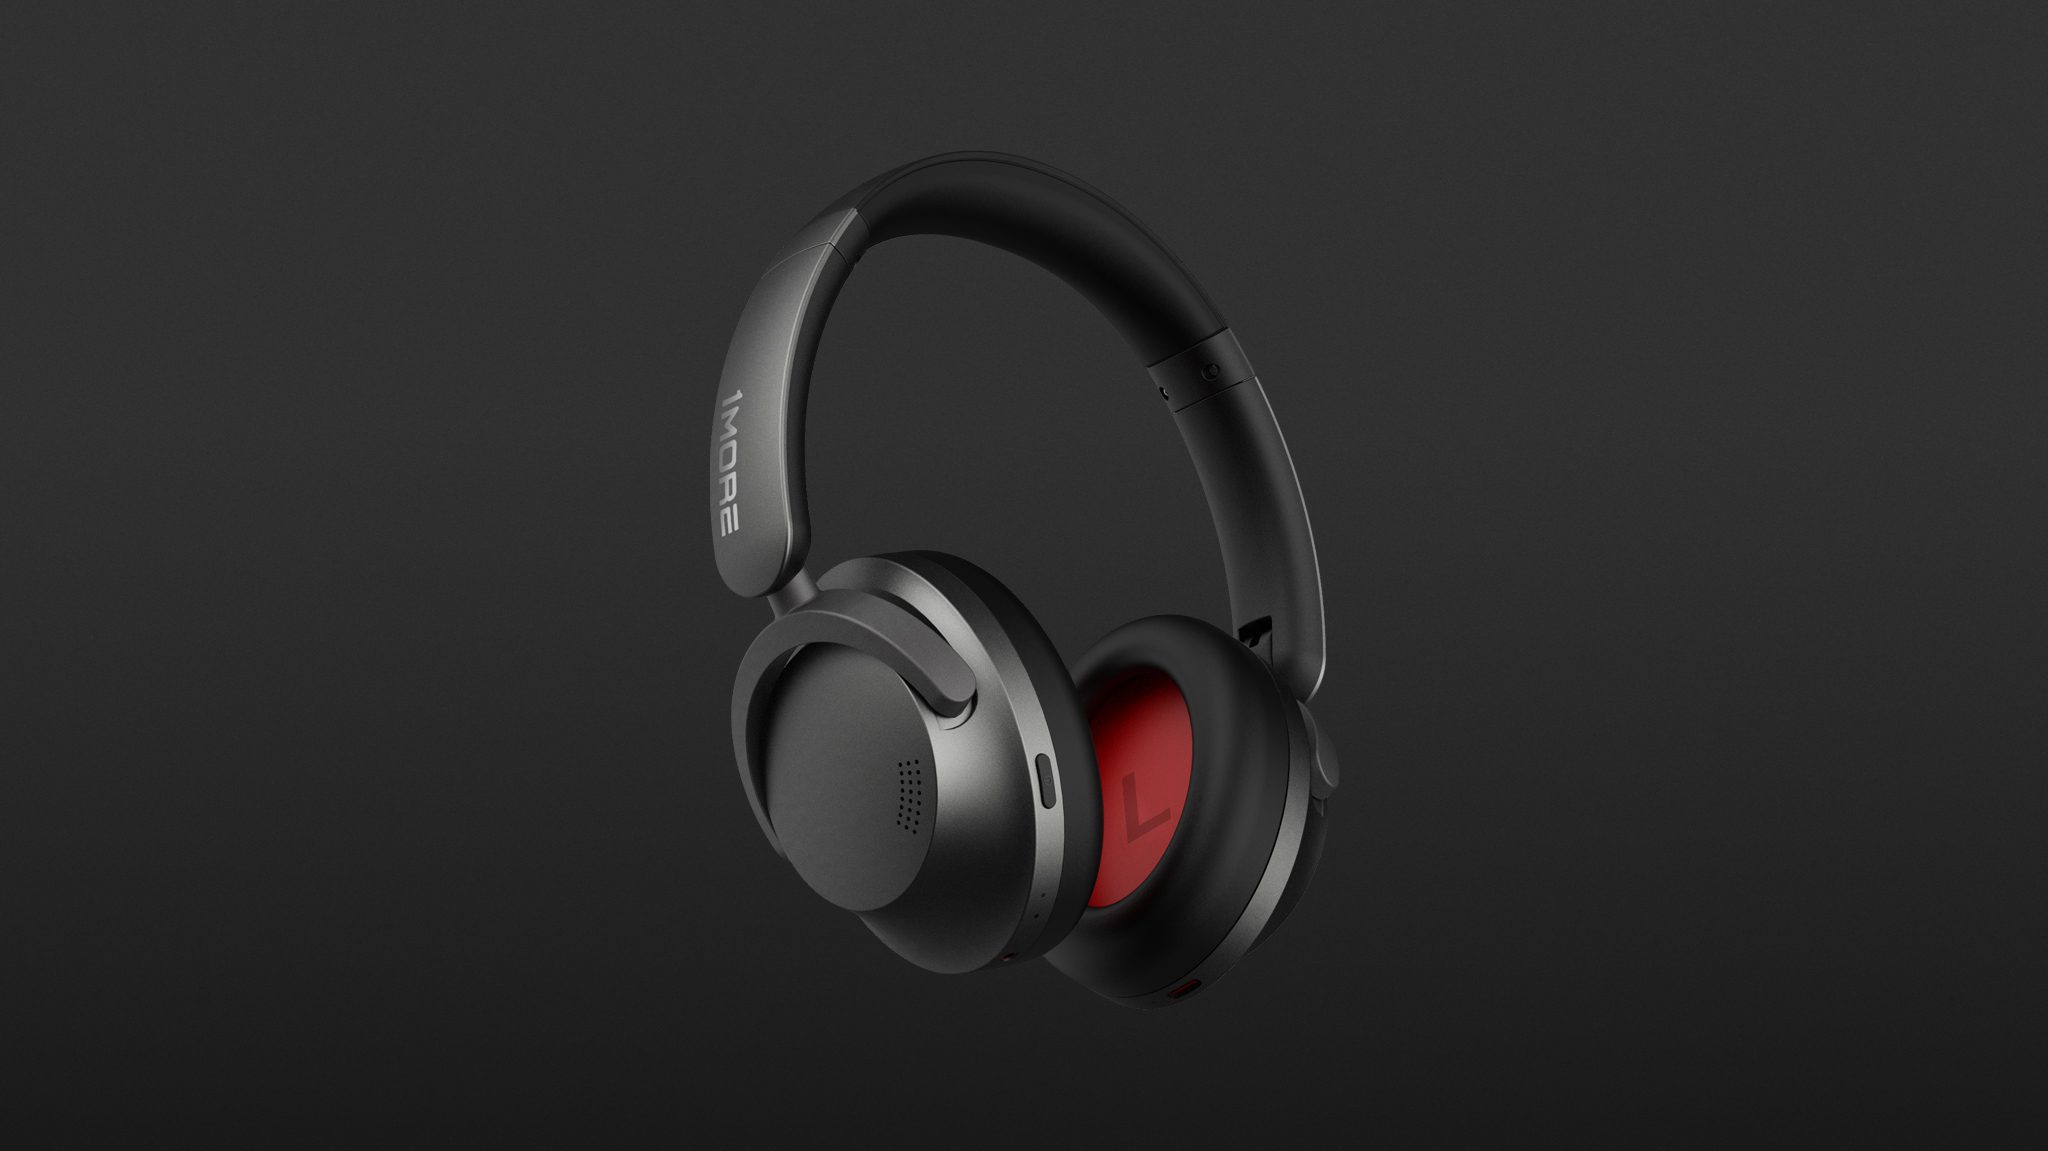 1More SonoFlow - An Entry-Level Headphone with good ANC, Bluetooth